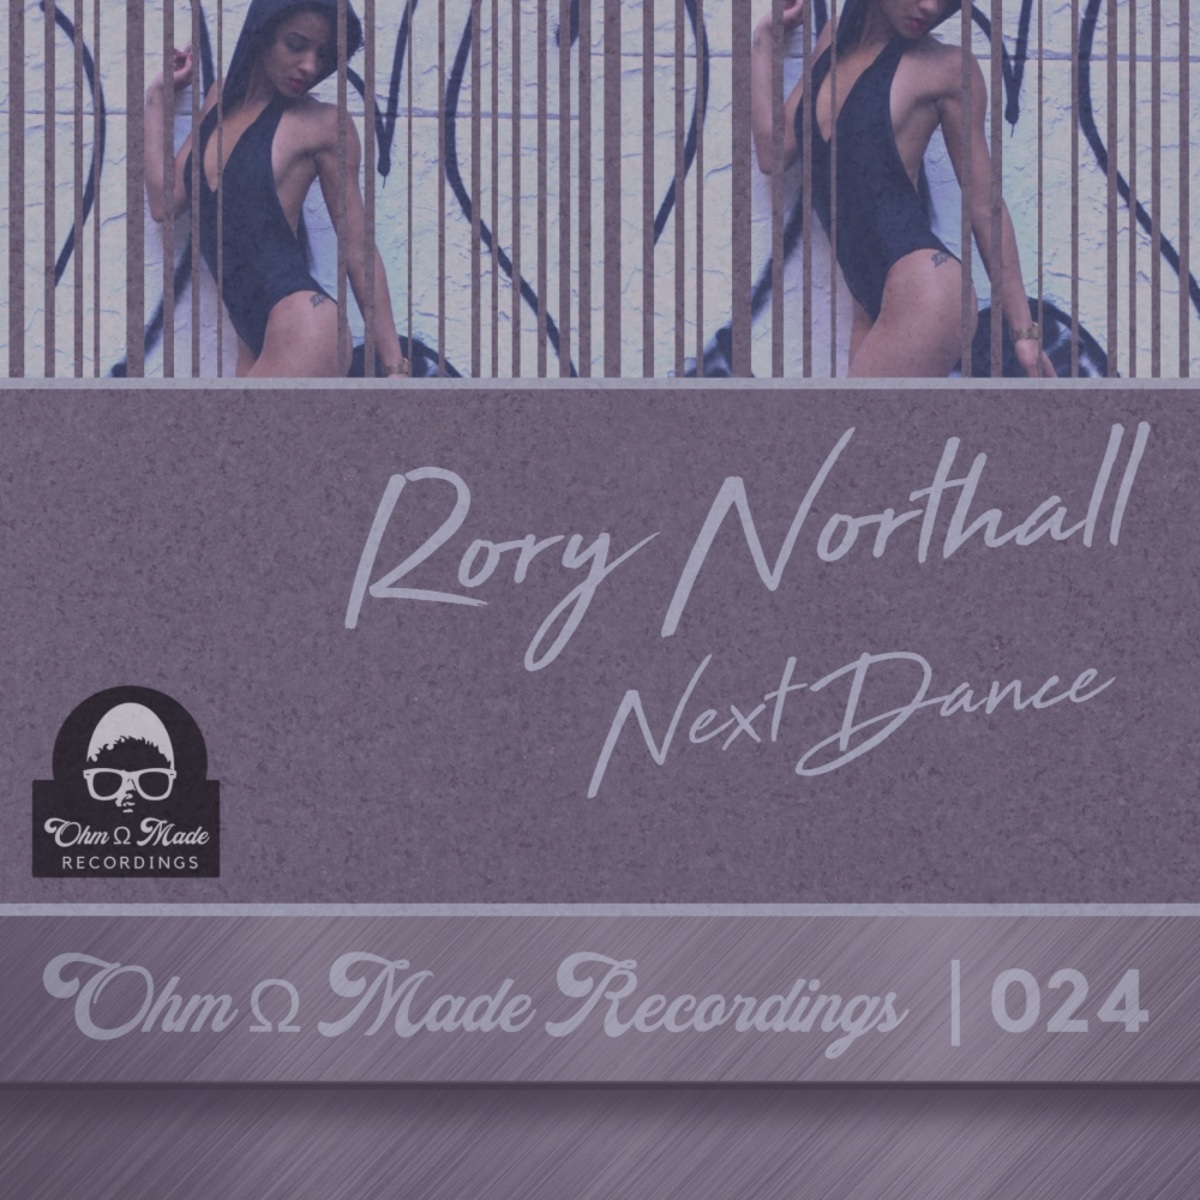 Rory Northall - Next Dance / Ohm Made Recordings